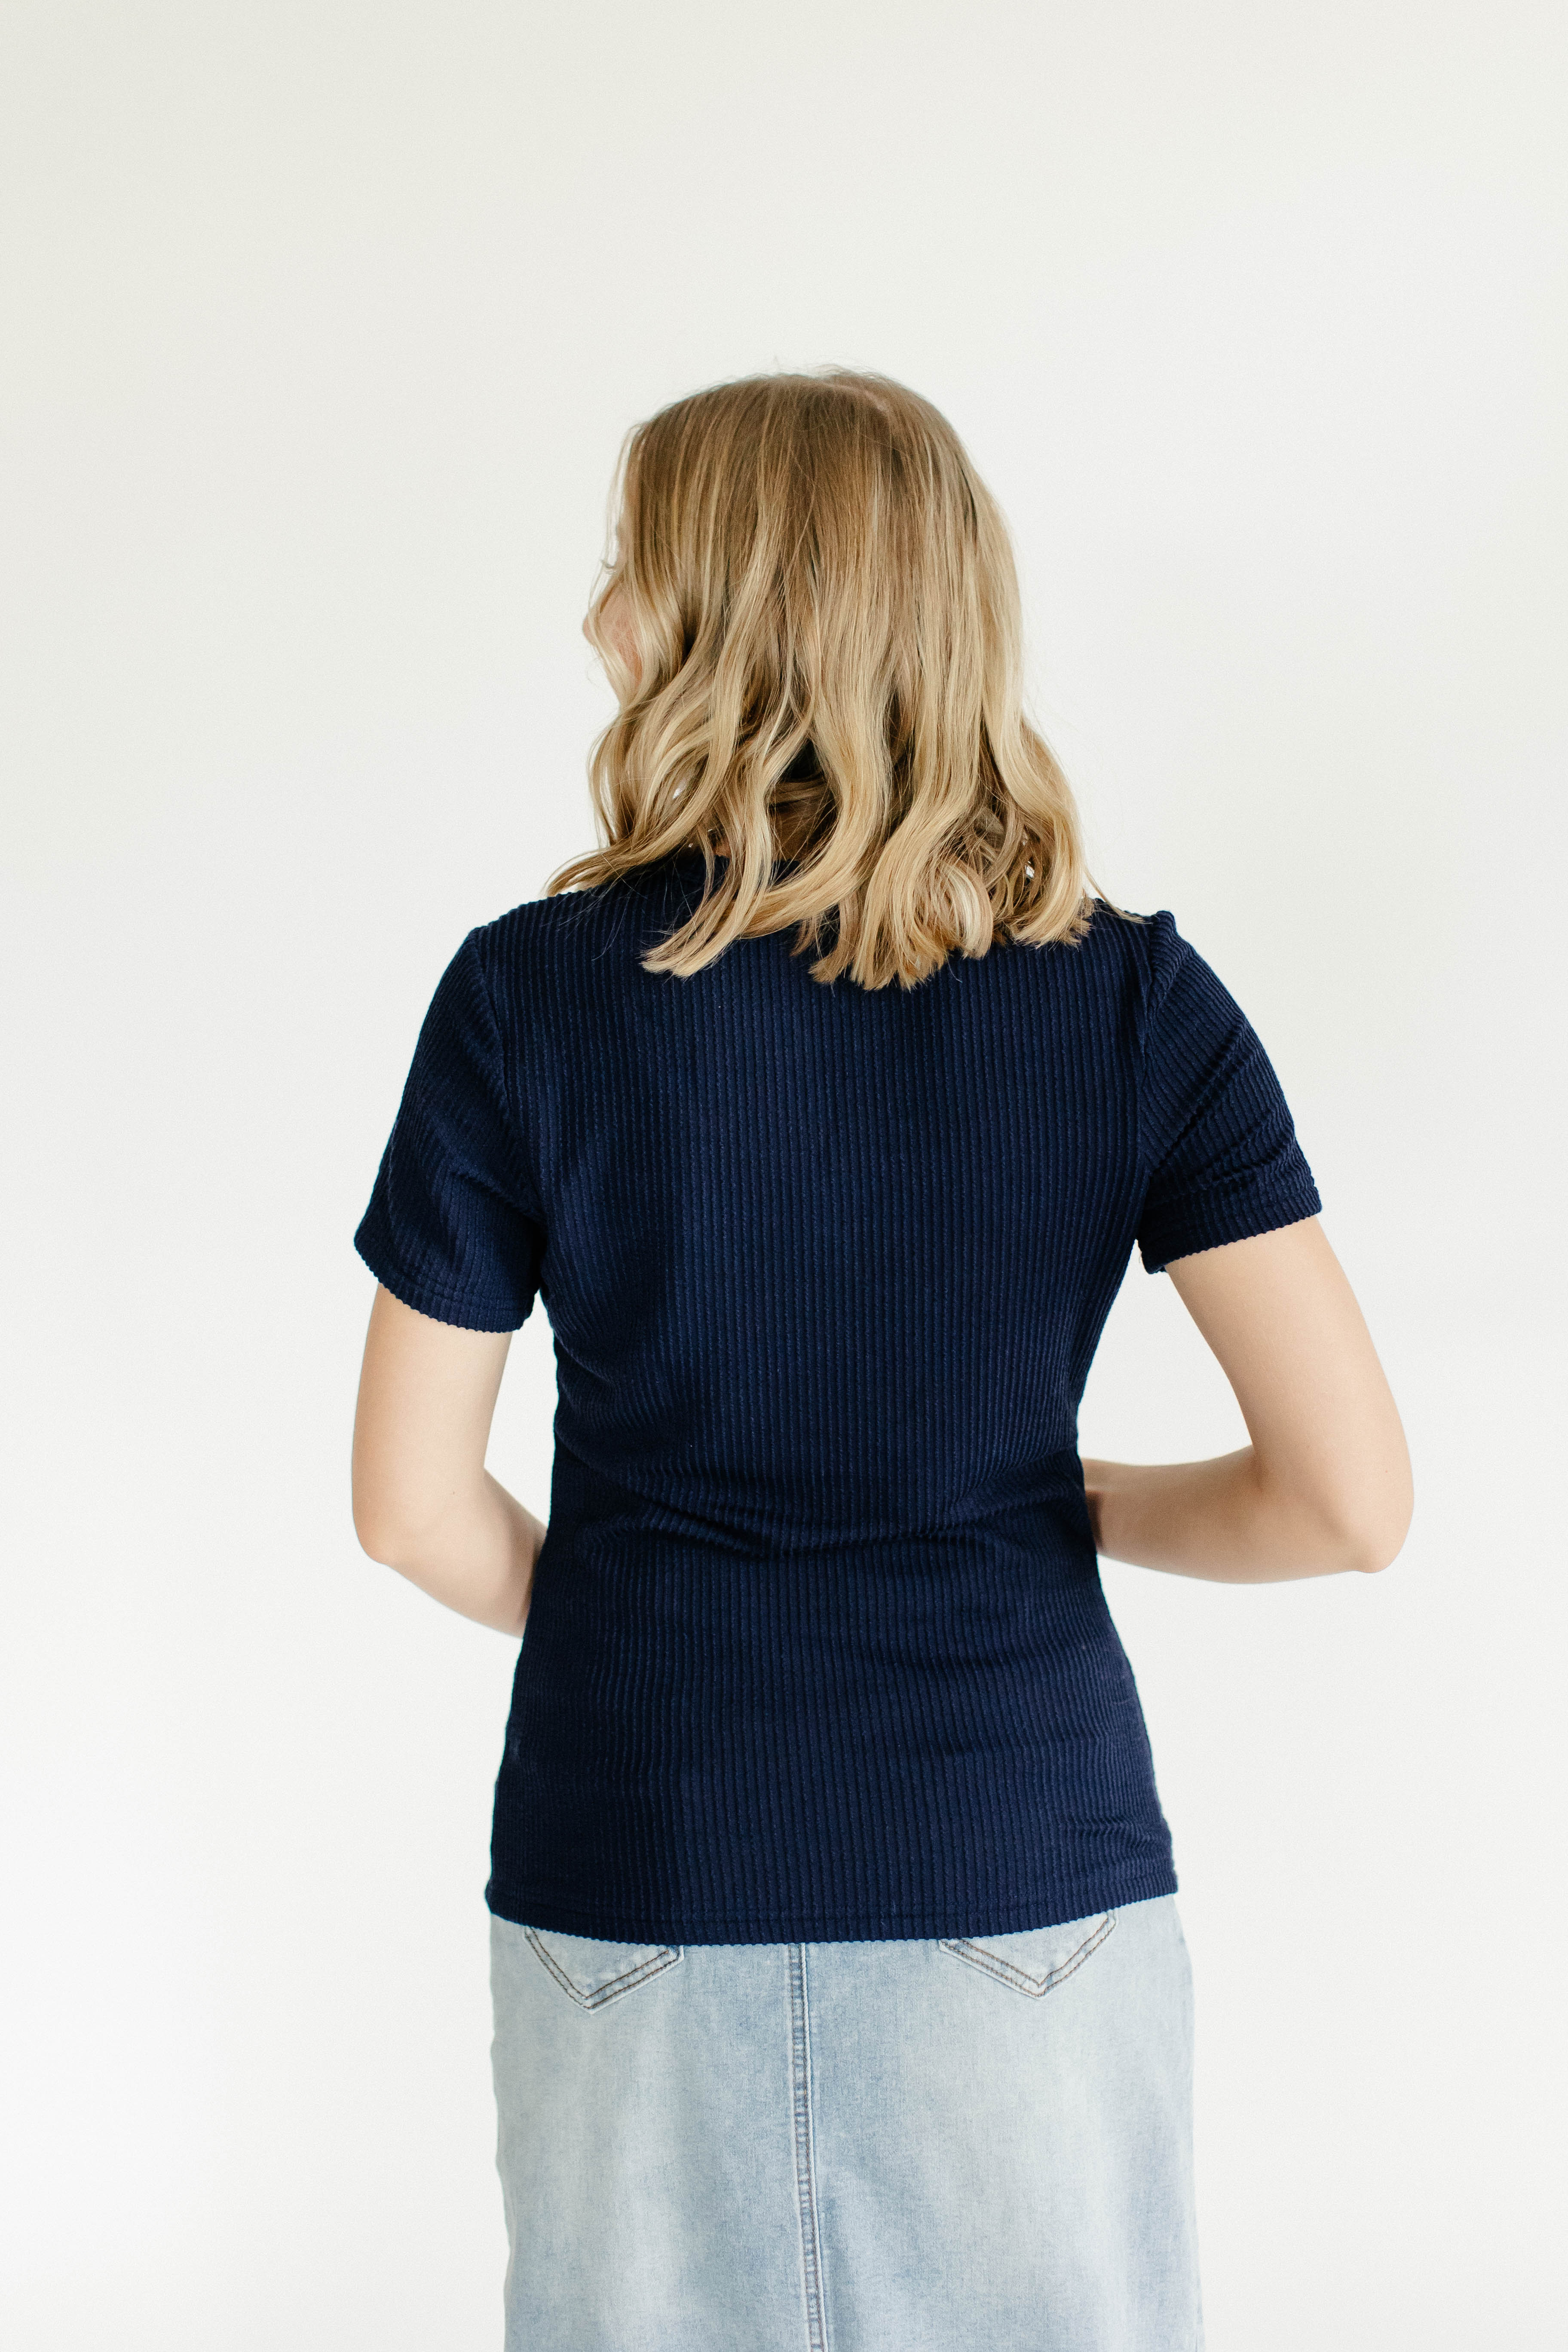 Modest Tops & Blouses | Women's Shirts | The Main Street Exchange – Page 2